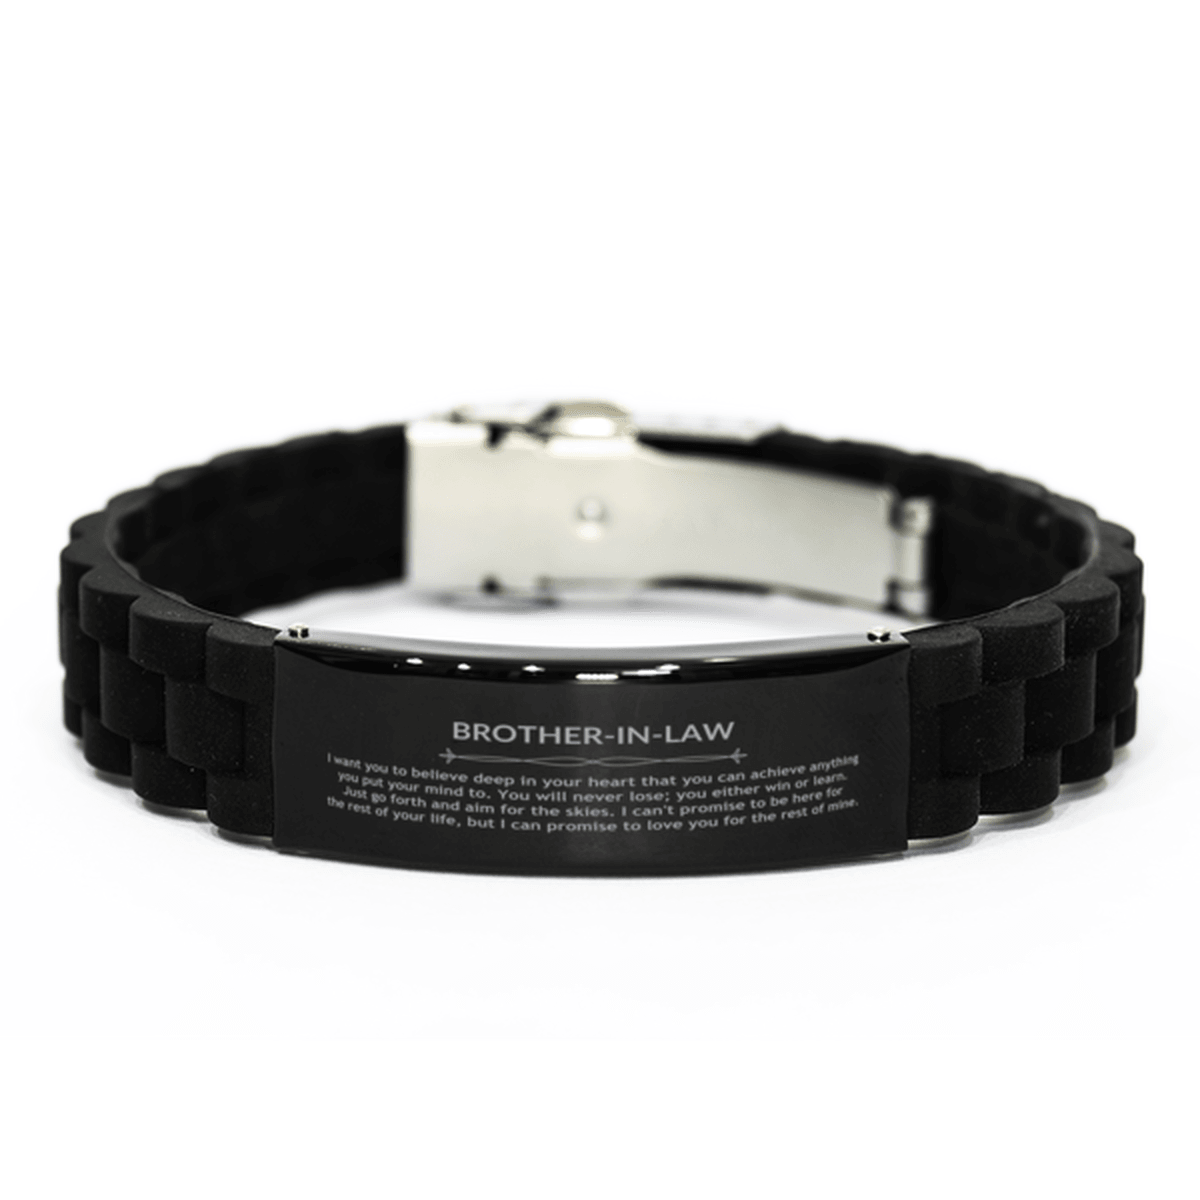 Motivational Brother In Law Black Glidelock Clasp Engraved Bracelet, Brother In Law I can promise to love you for the rest of mine, Christmas, Birthday Jewelry Gift - Mallard Moon Gift Shop